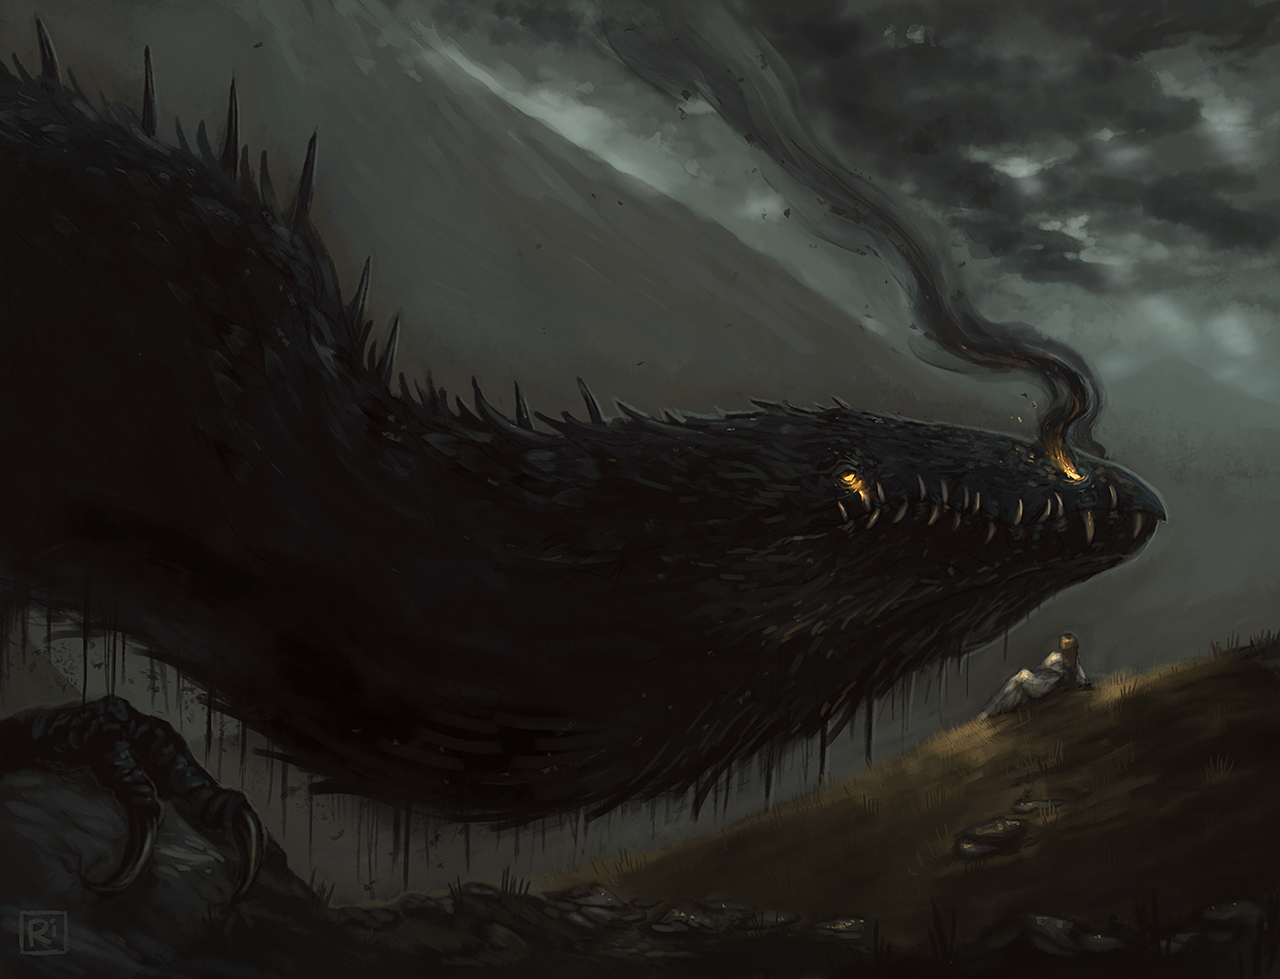 Tolkien Time: The size of Glaurung